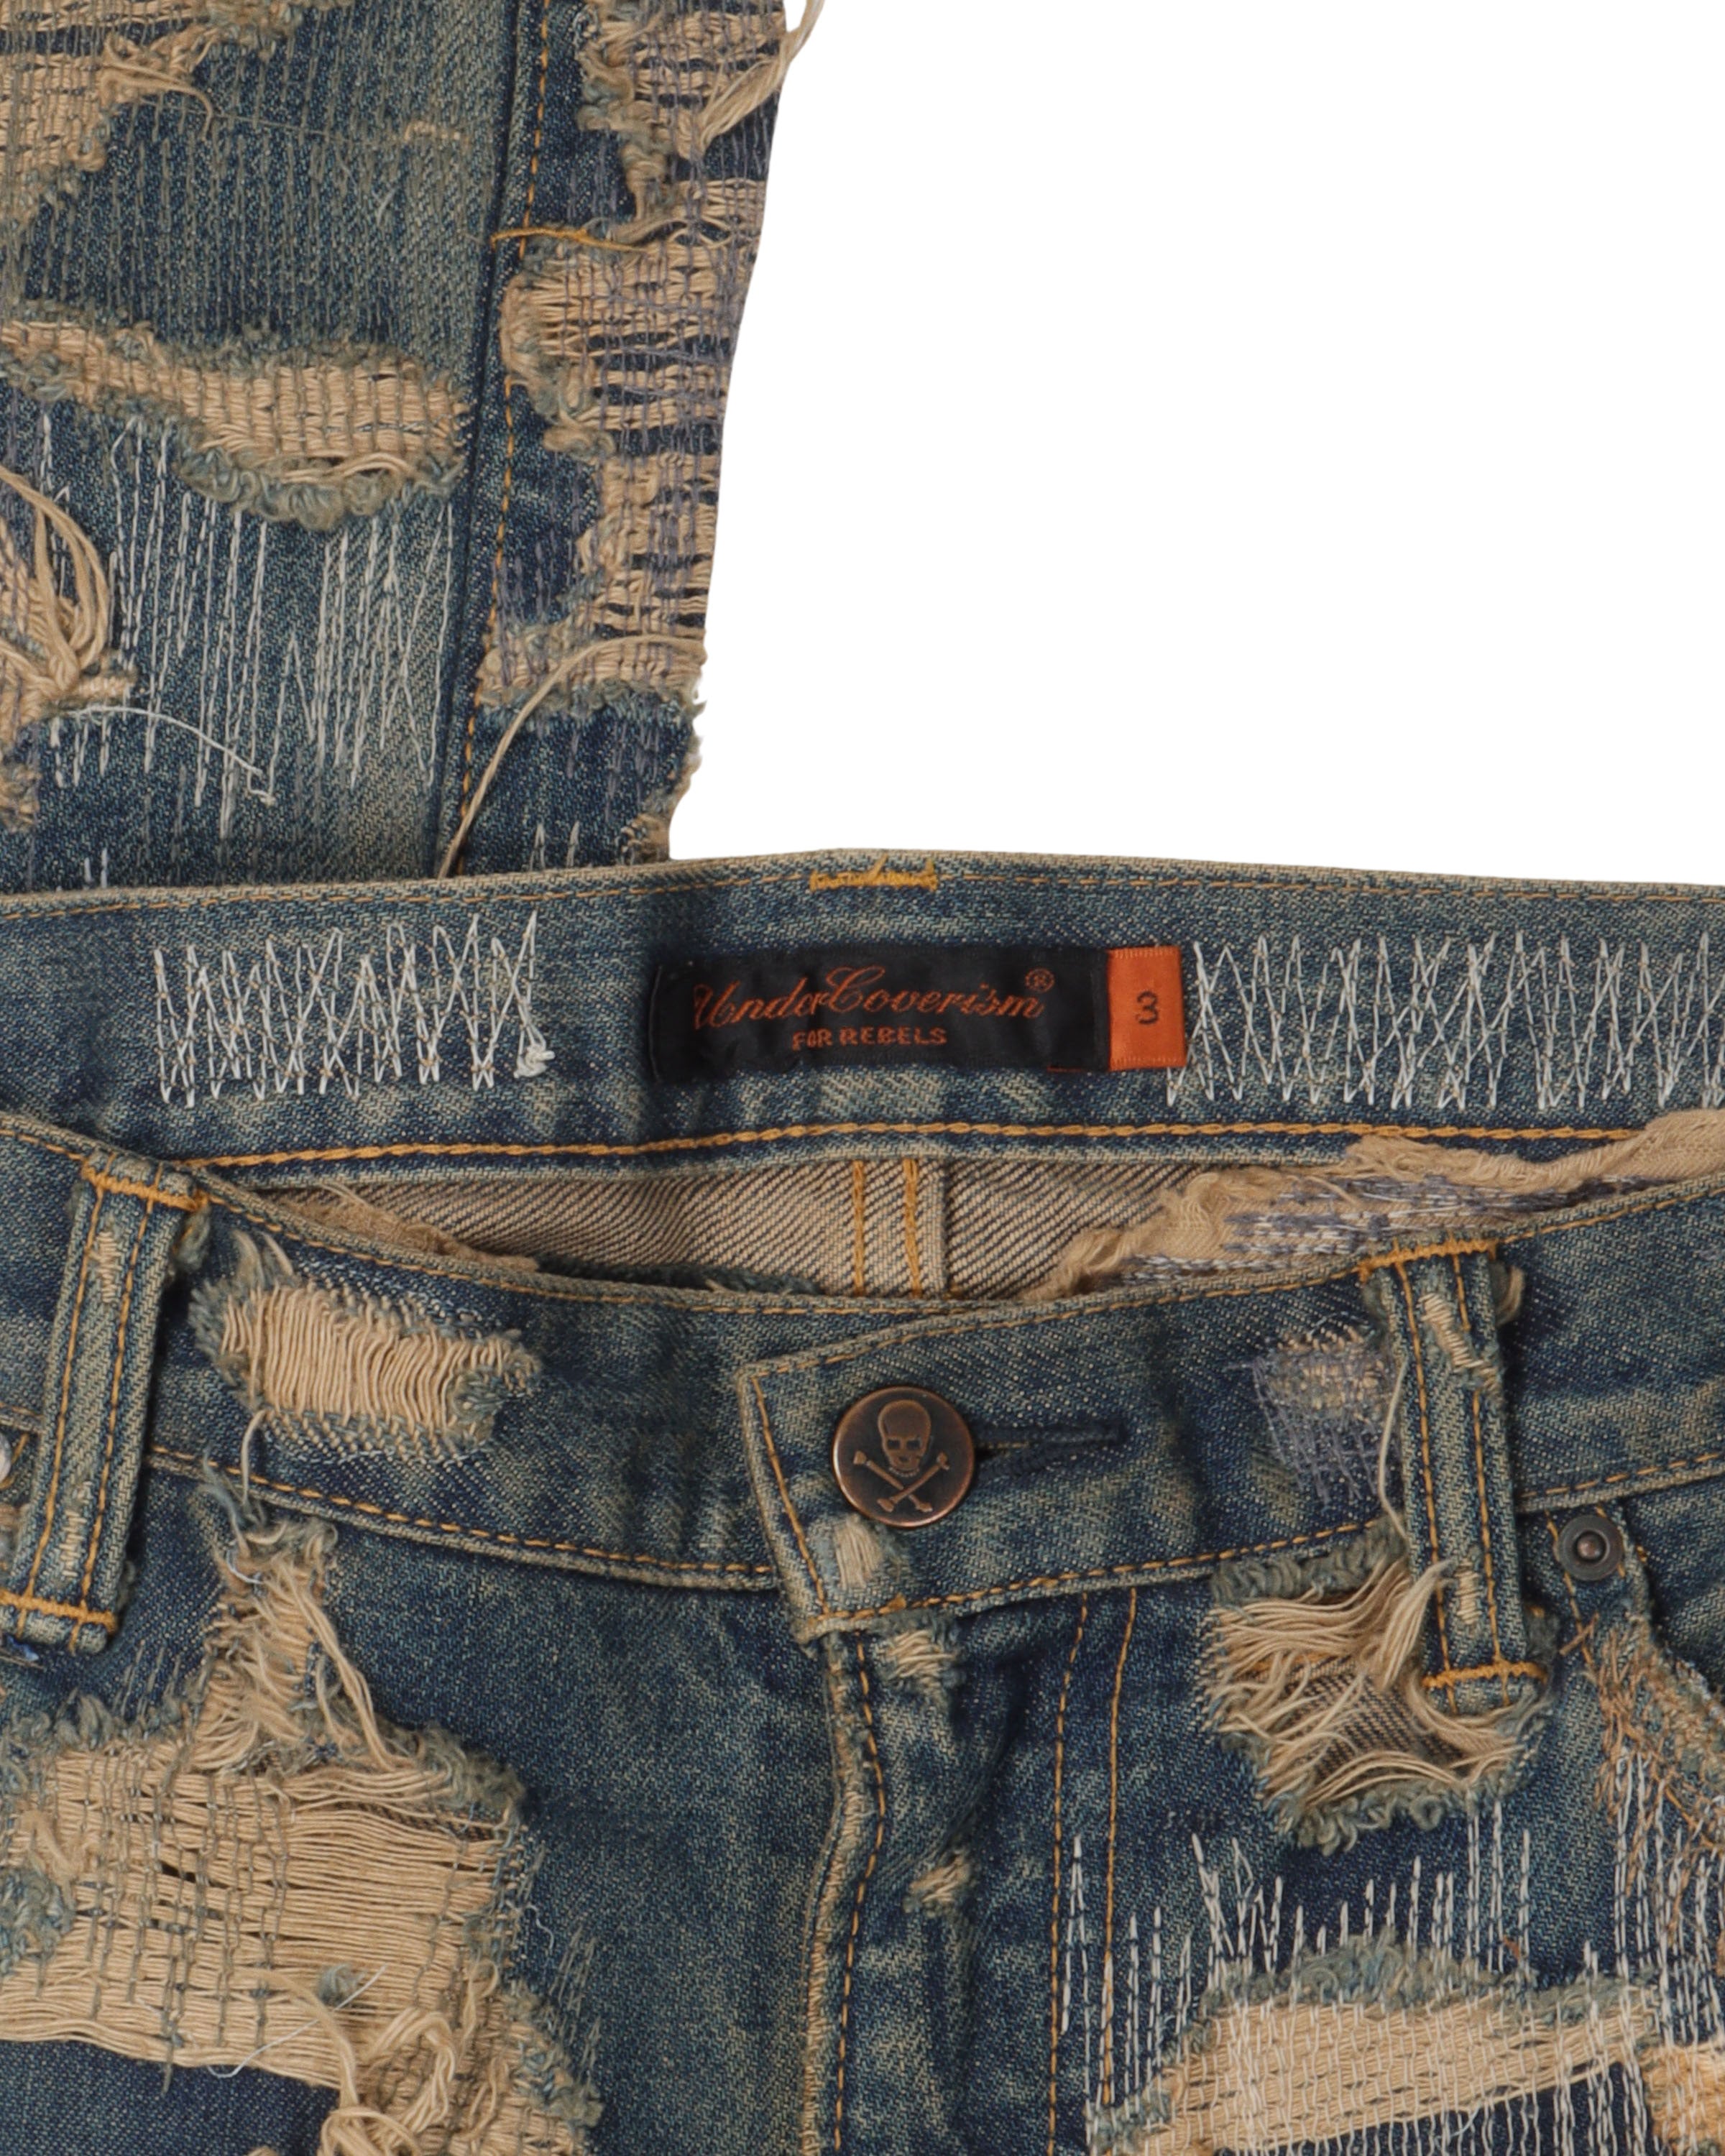 AW05 "Arts & Crafts" 85 Jeans